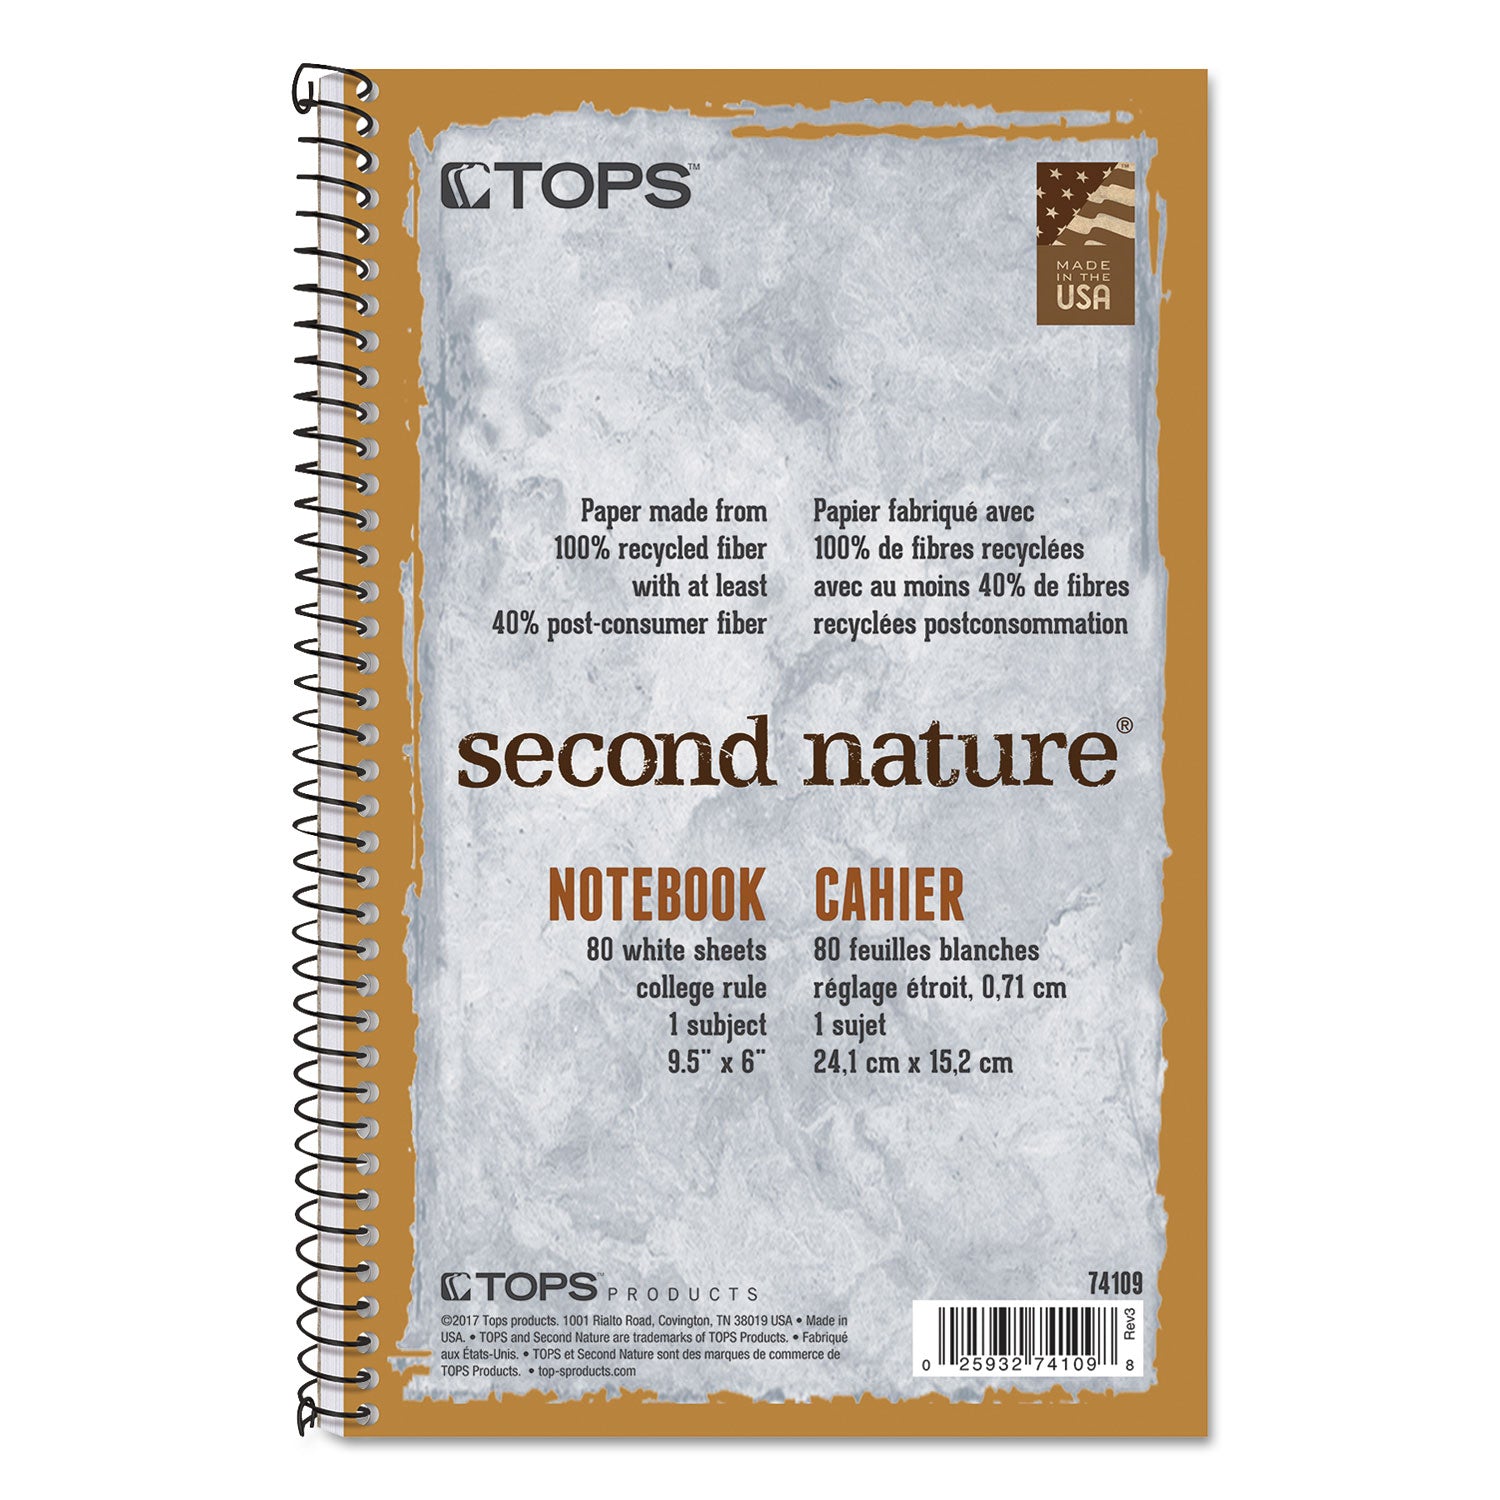 Second Nature Single Subject Wirebound Notebooks, Medium/College Rule, Light Blue Cover, (80) 9.5 x 6 Sheets - 